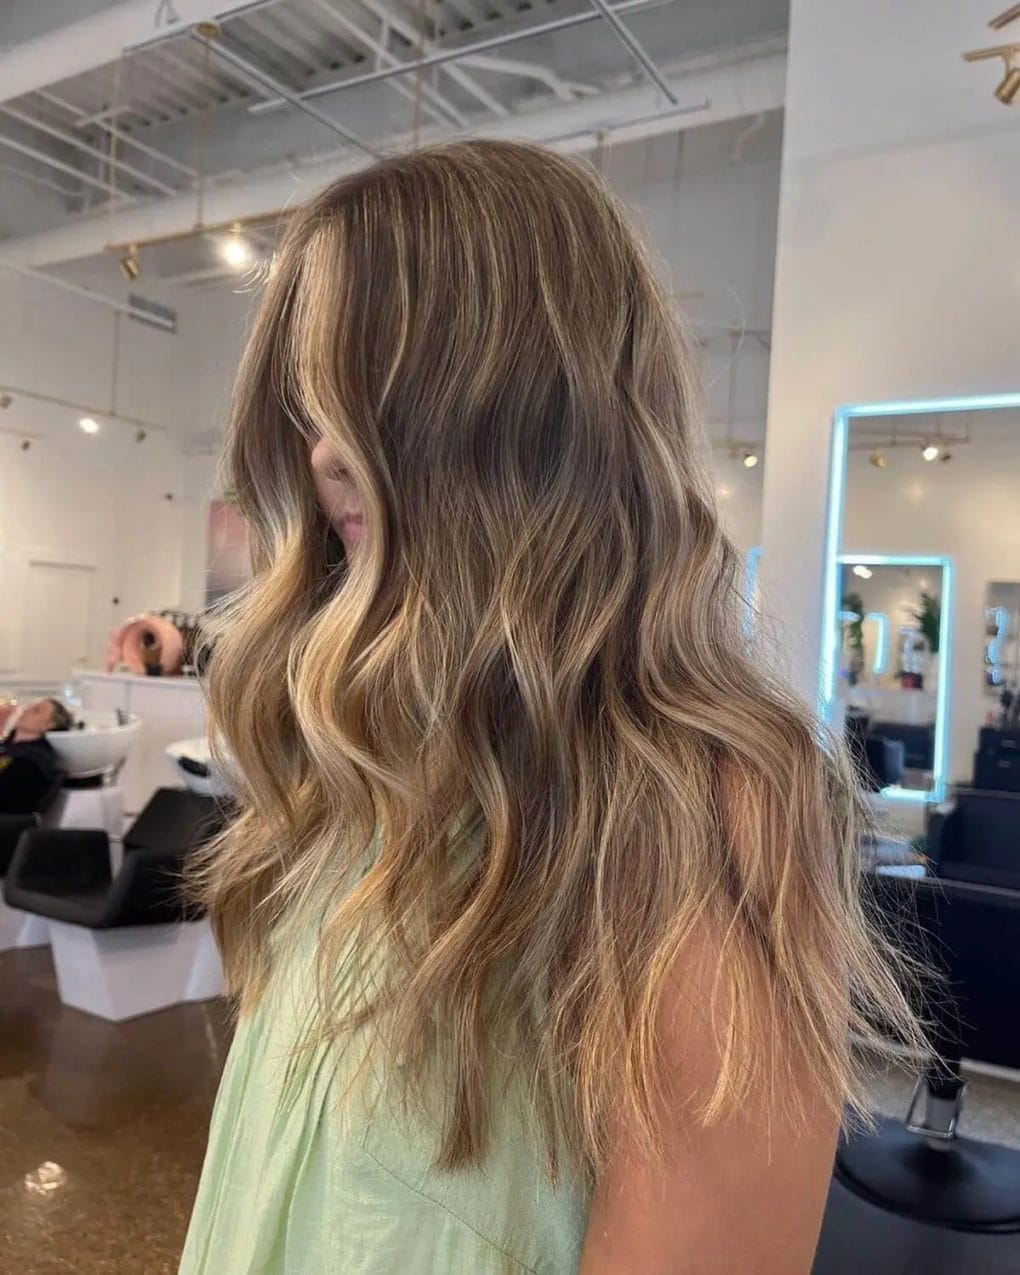 Bohemian waves with golden blonde gradient on brunette hair.